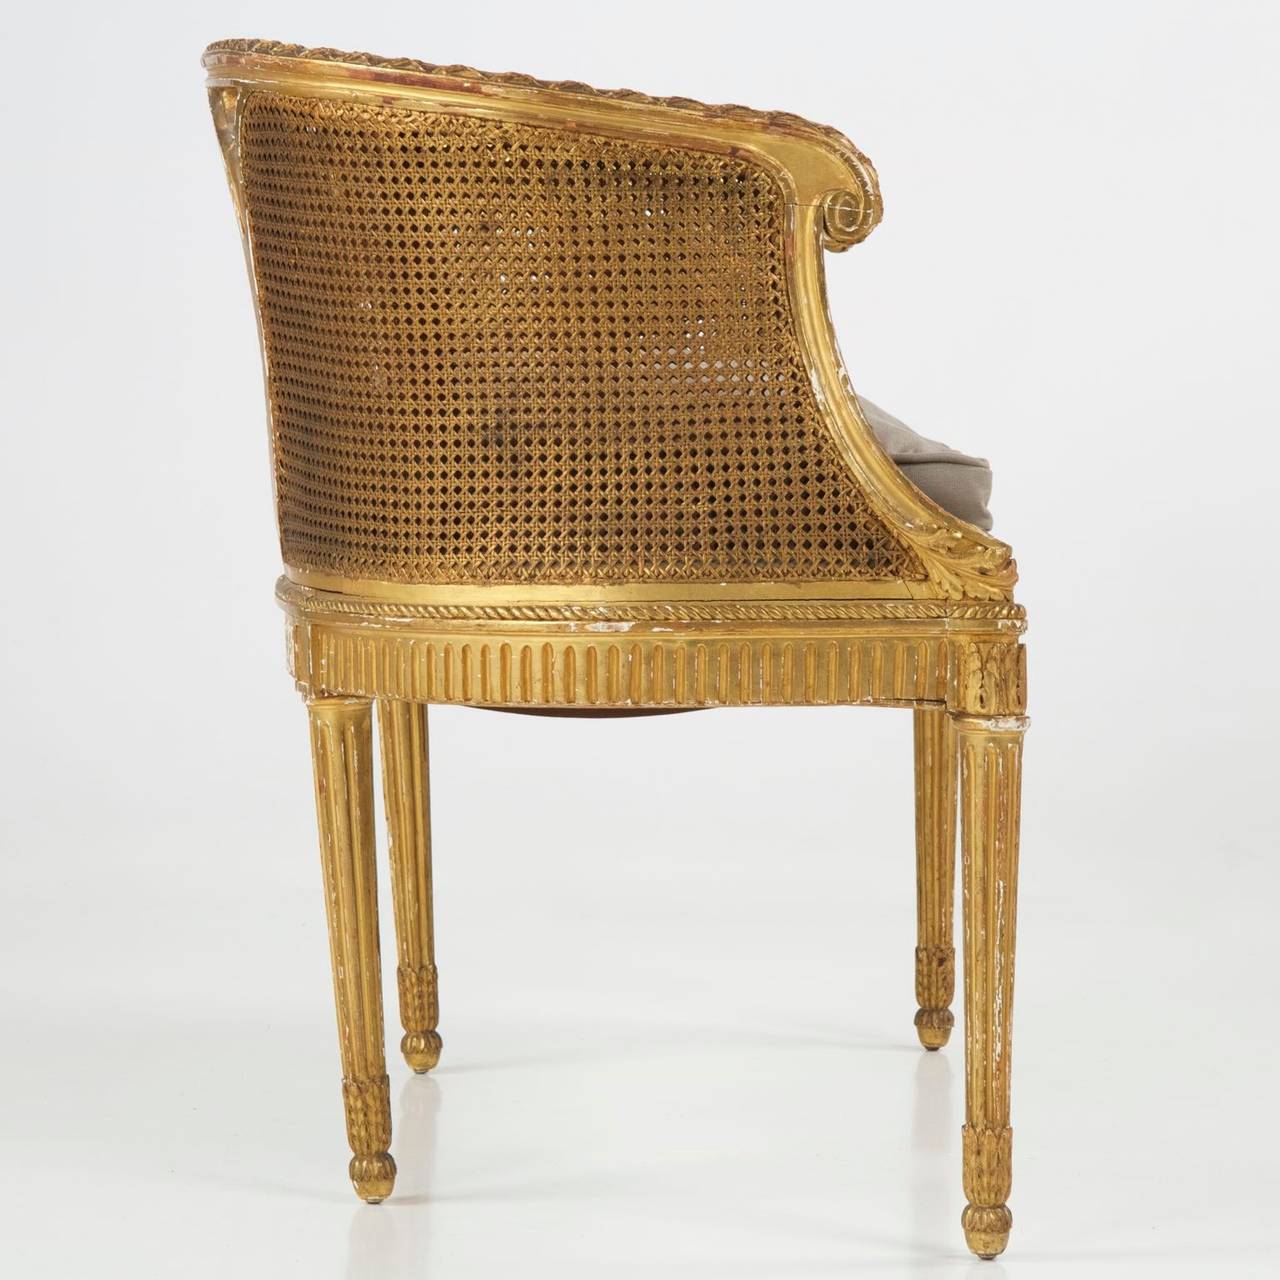 A delightful little French gilt wood settee of small proportions, generally referred to as a 